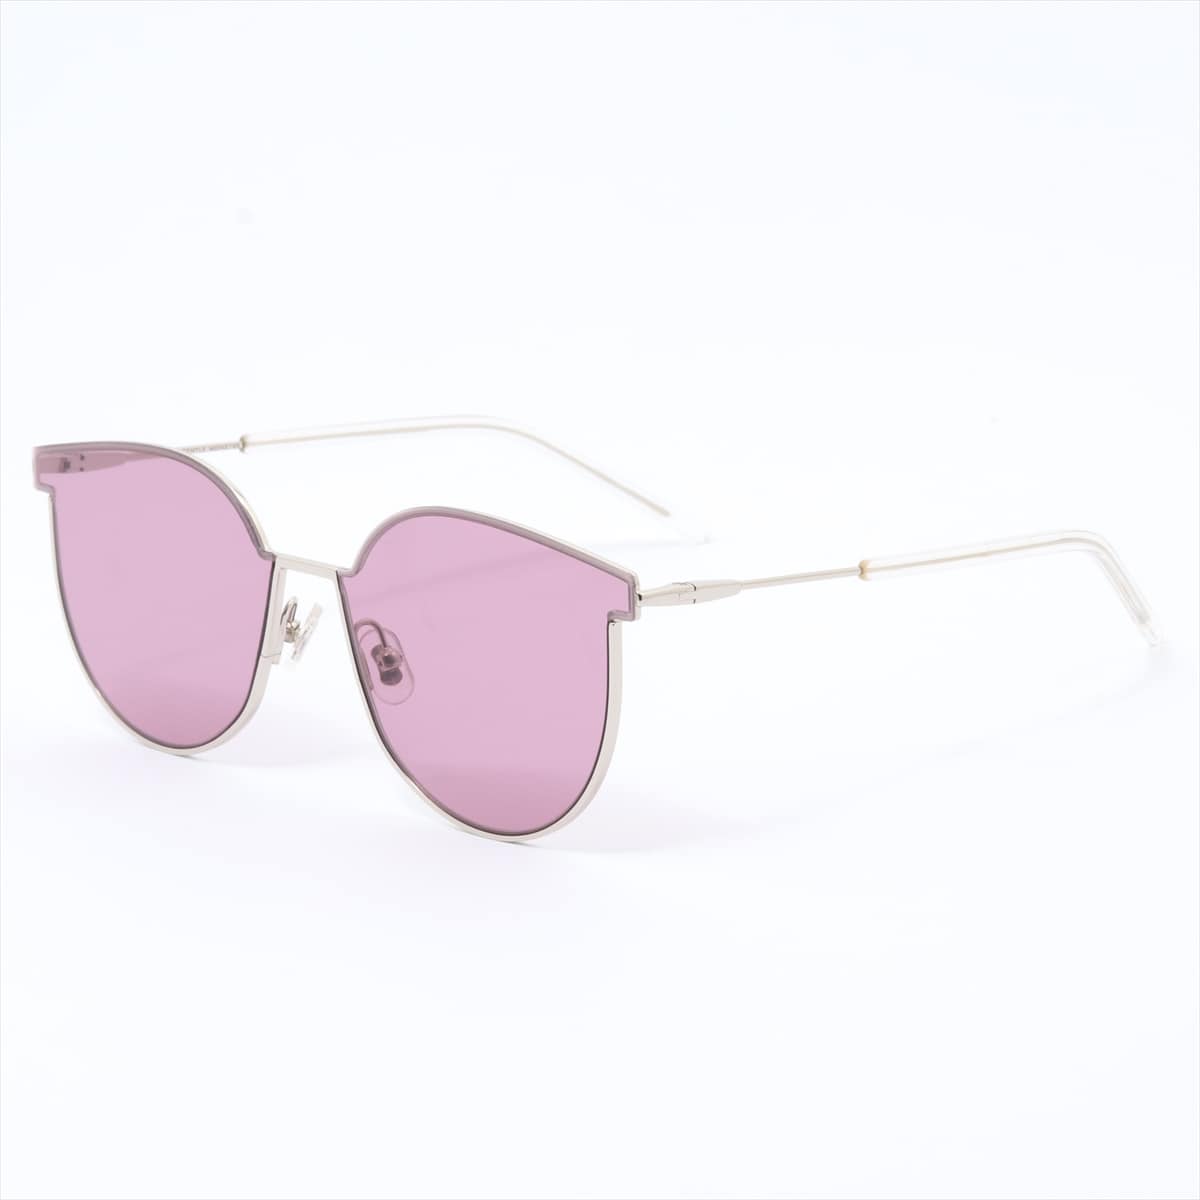 Gentle Monster Sunglass Plastic pink purple Comes with a box